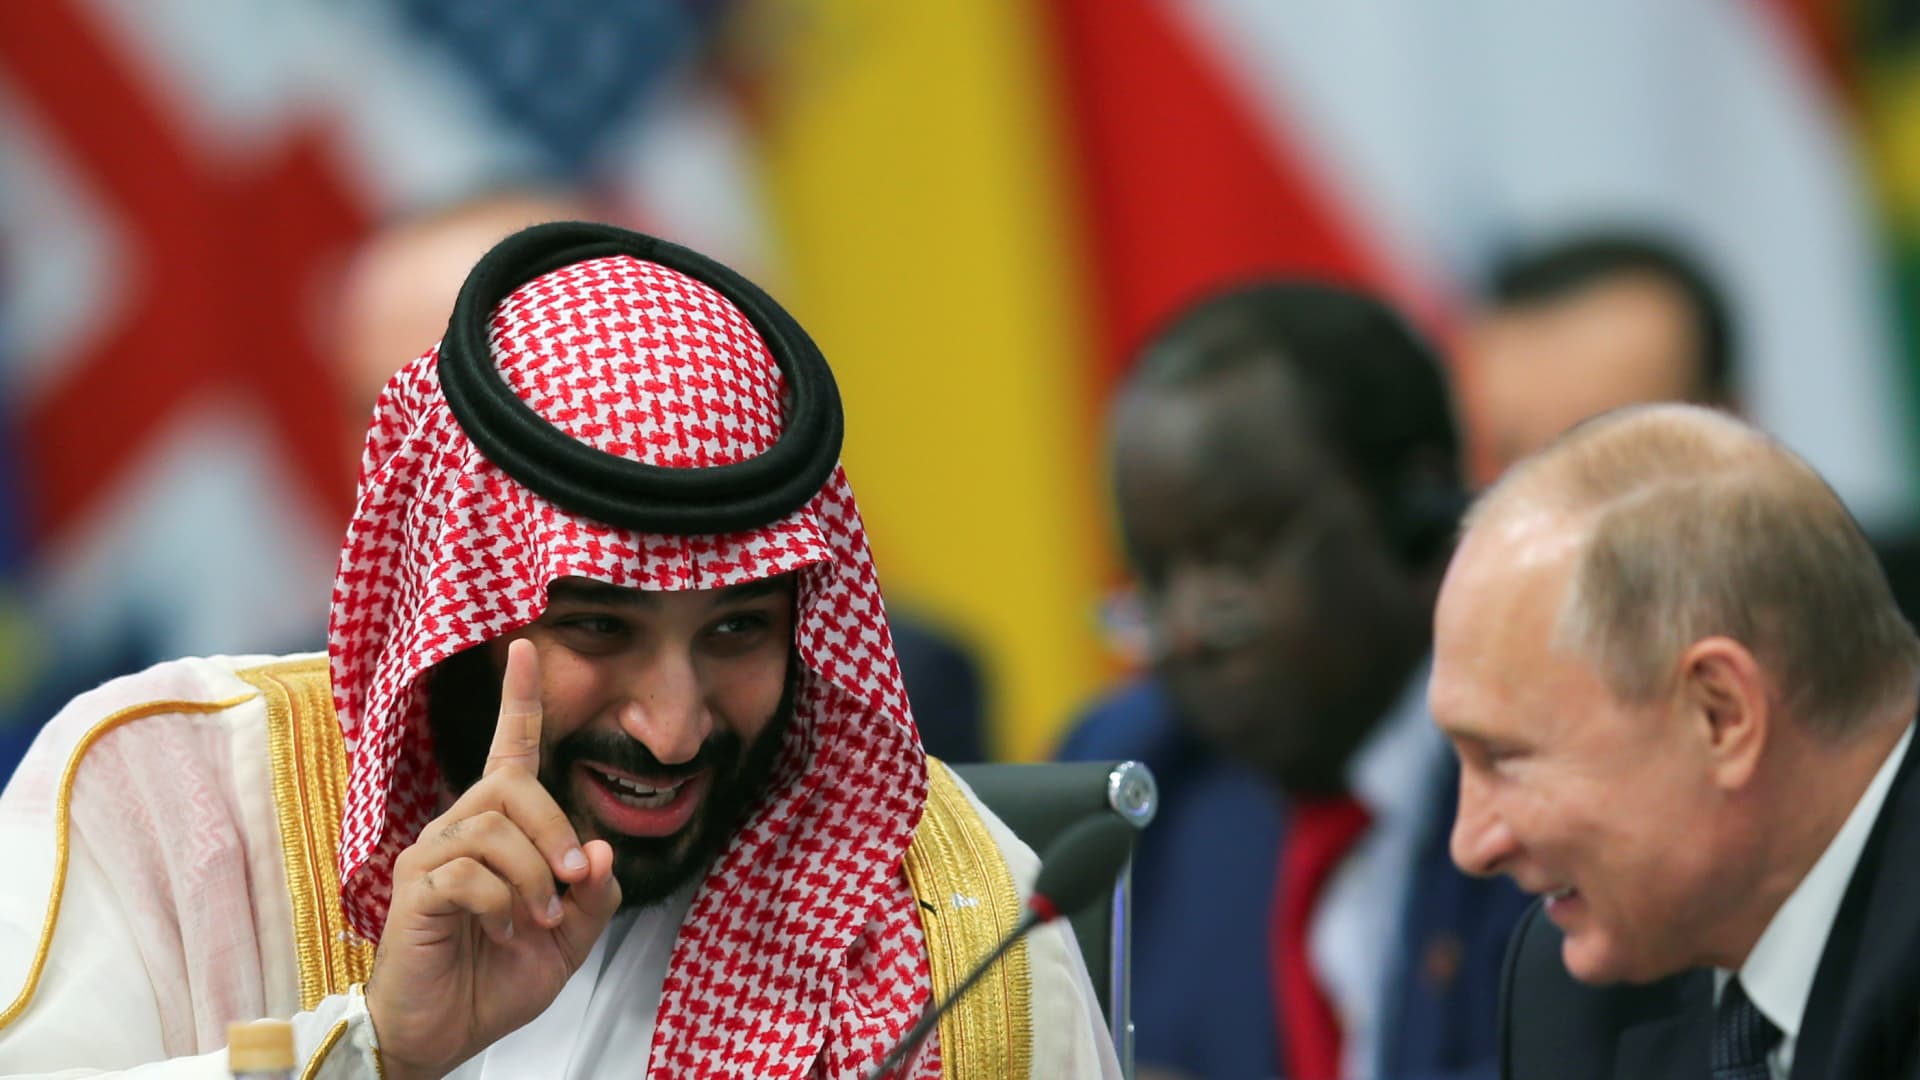 Saudi Arabia's Crown Prince Mohammed bin Salman speaking with Russian President Vladimir Putin during the opening of the G20 leaders summit in Buenos Aires, Argentina, in 2018.